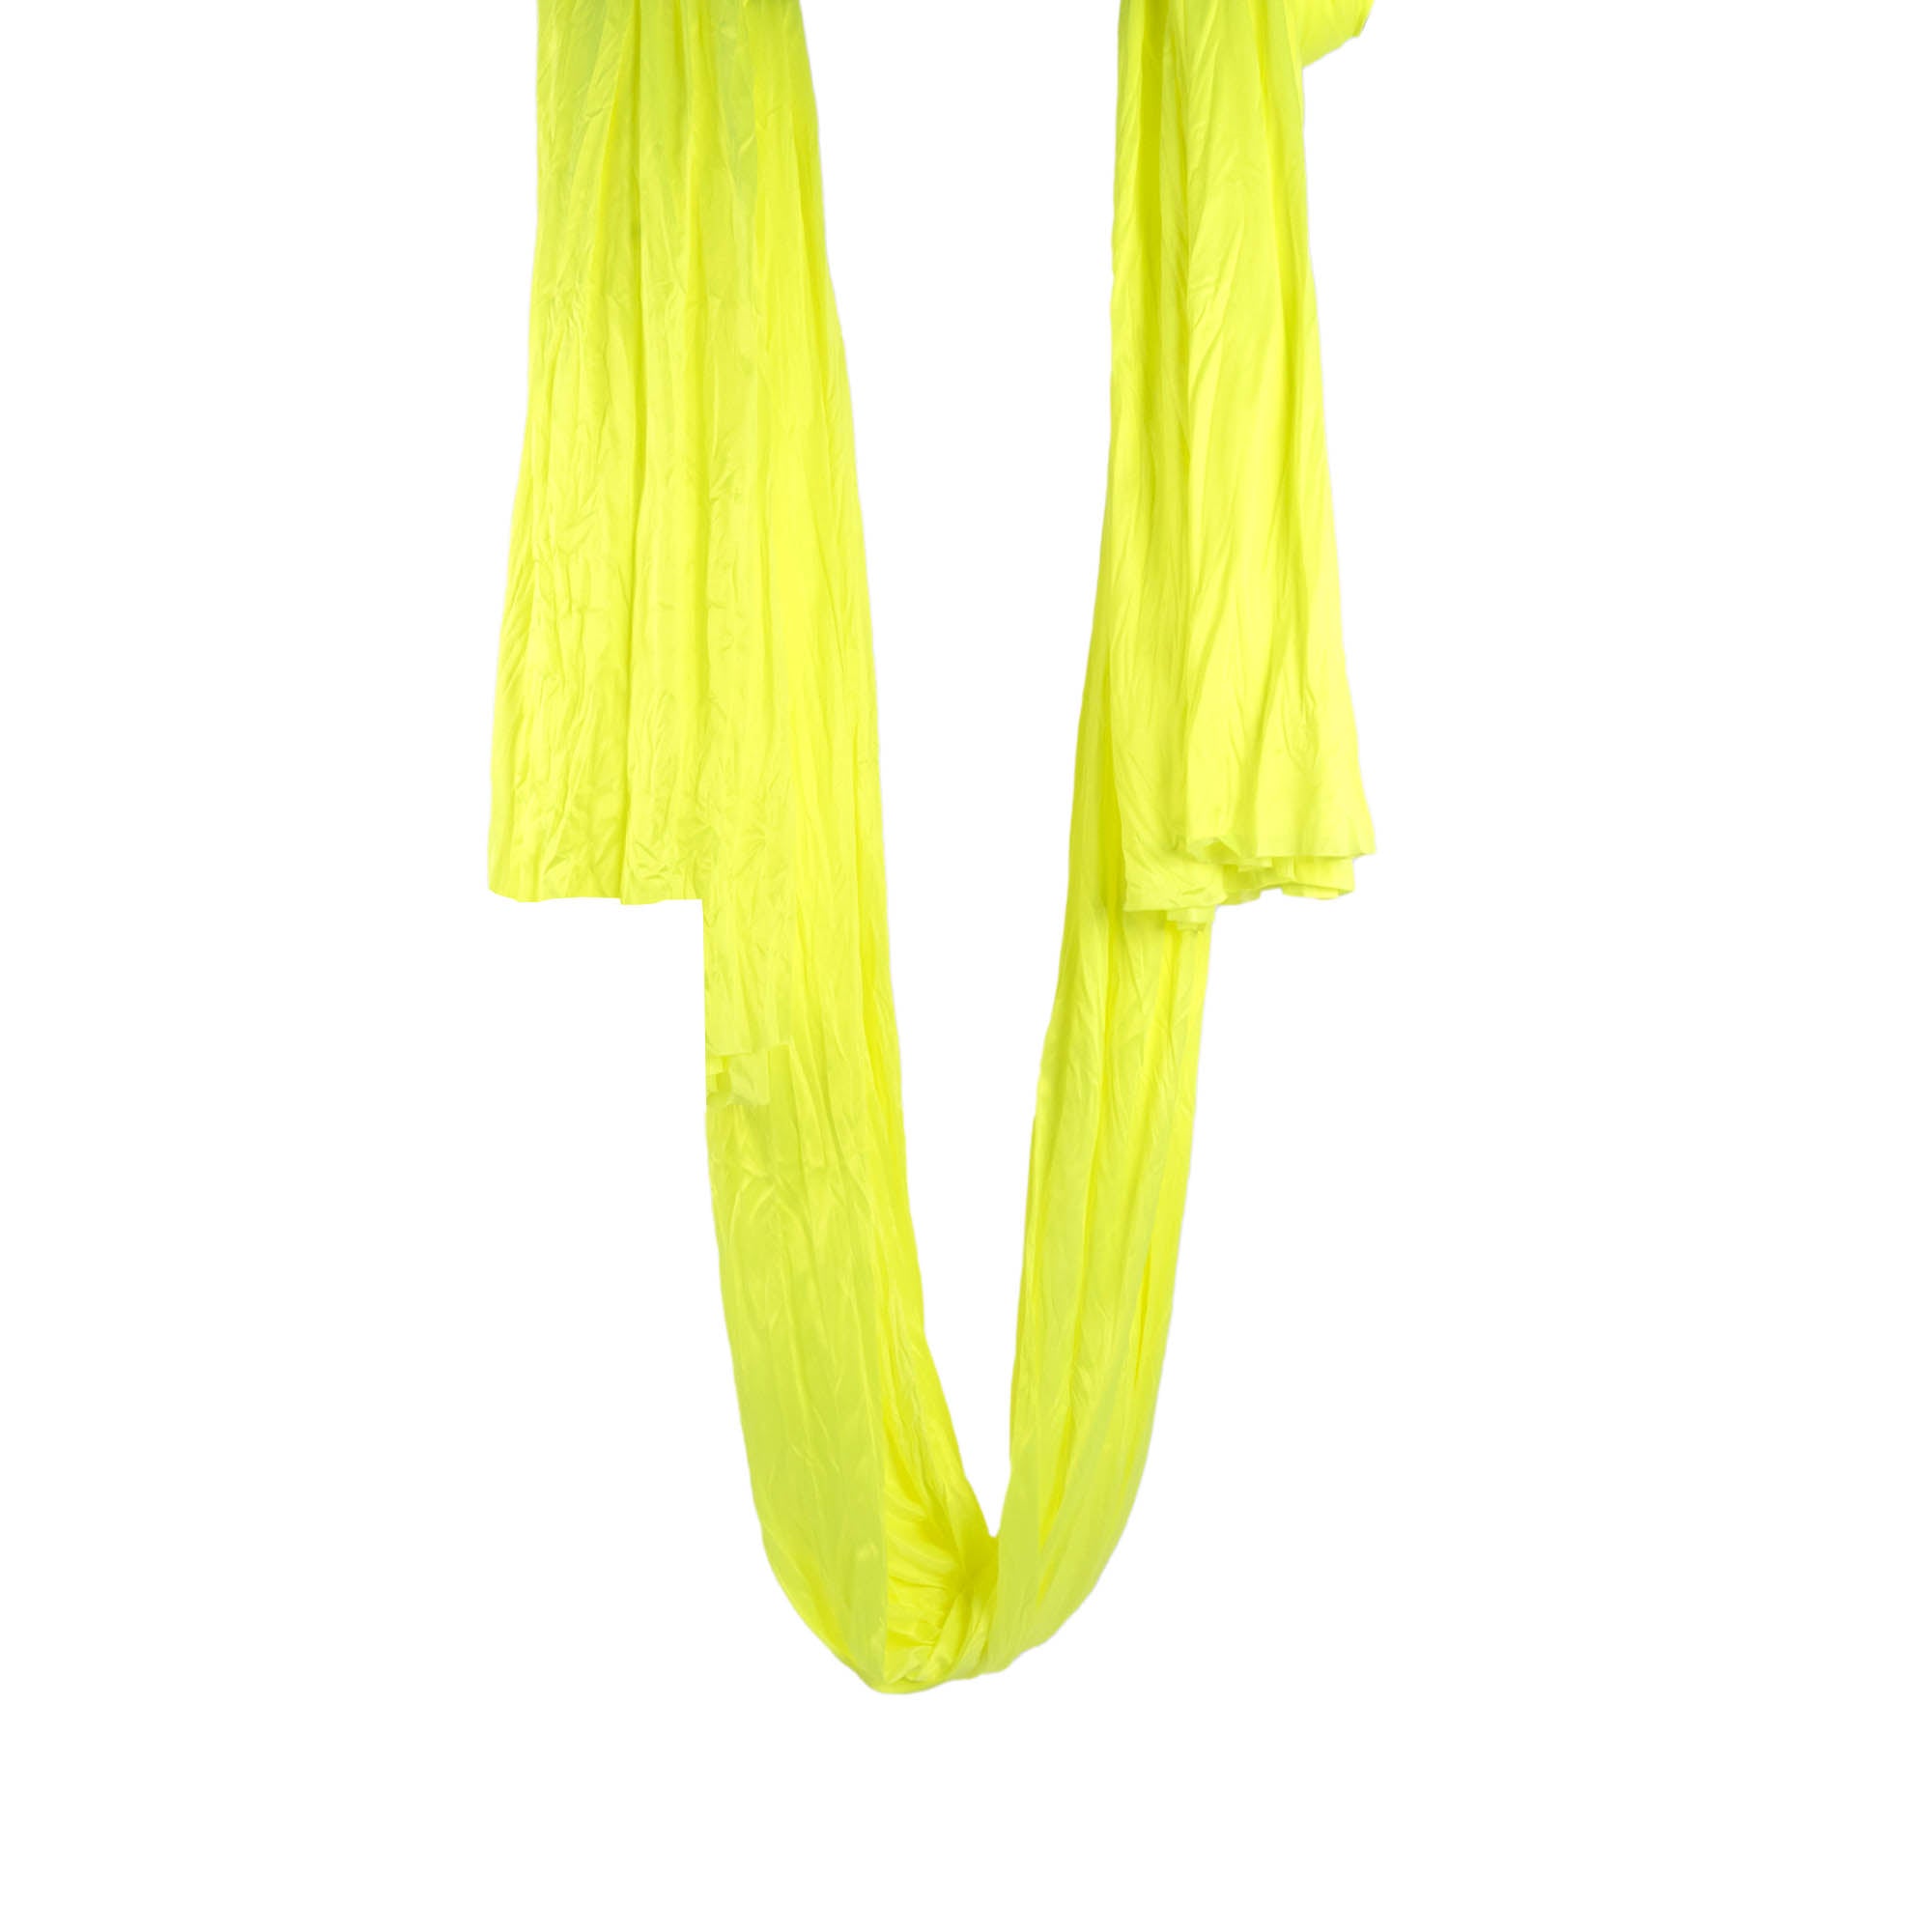 Prodigy Aerial sling with O rings and bag - neon yellow hanging